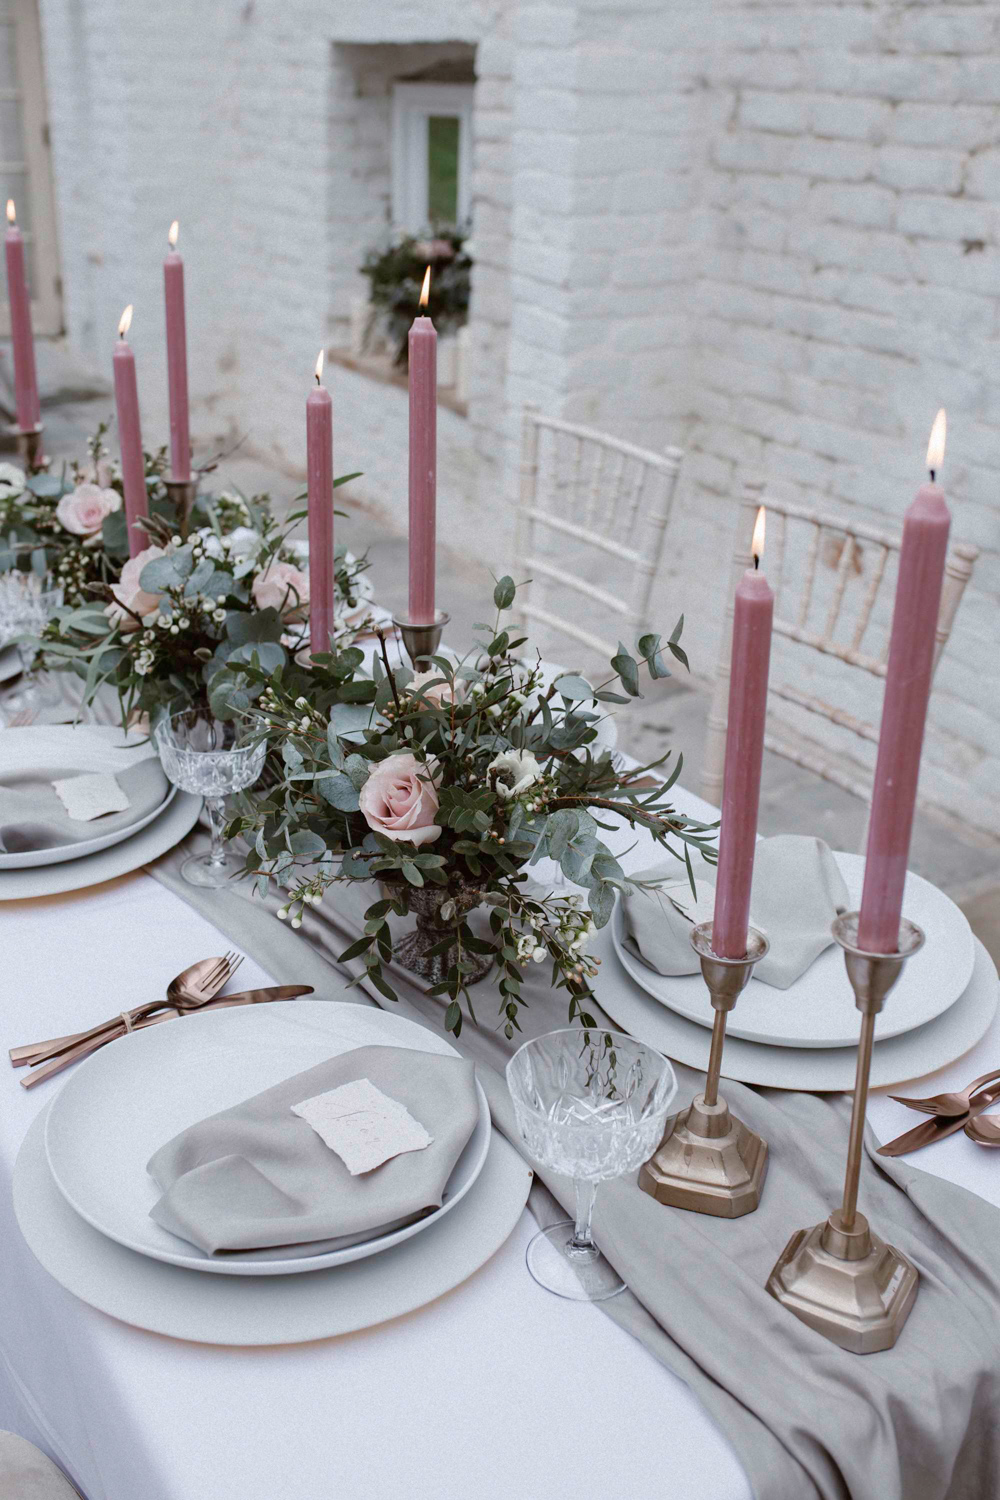 The table was laid with a grey table runner and napkins and pink candles, I love blush roses in the textural centerpieces